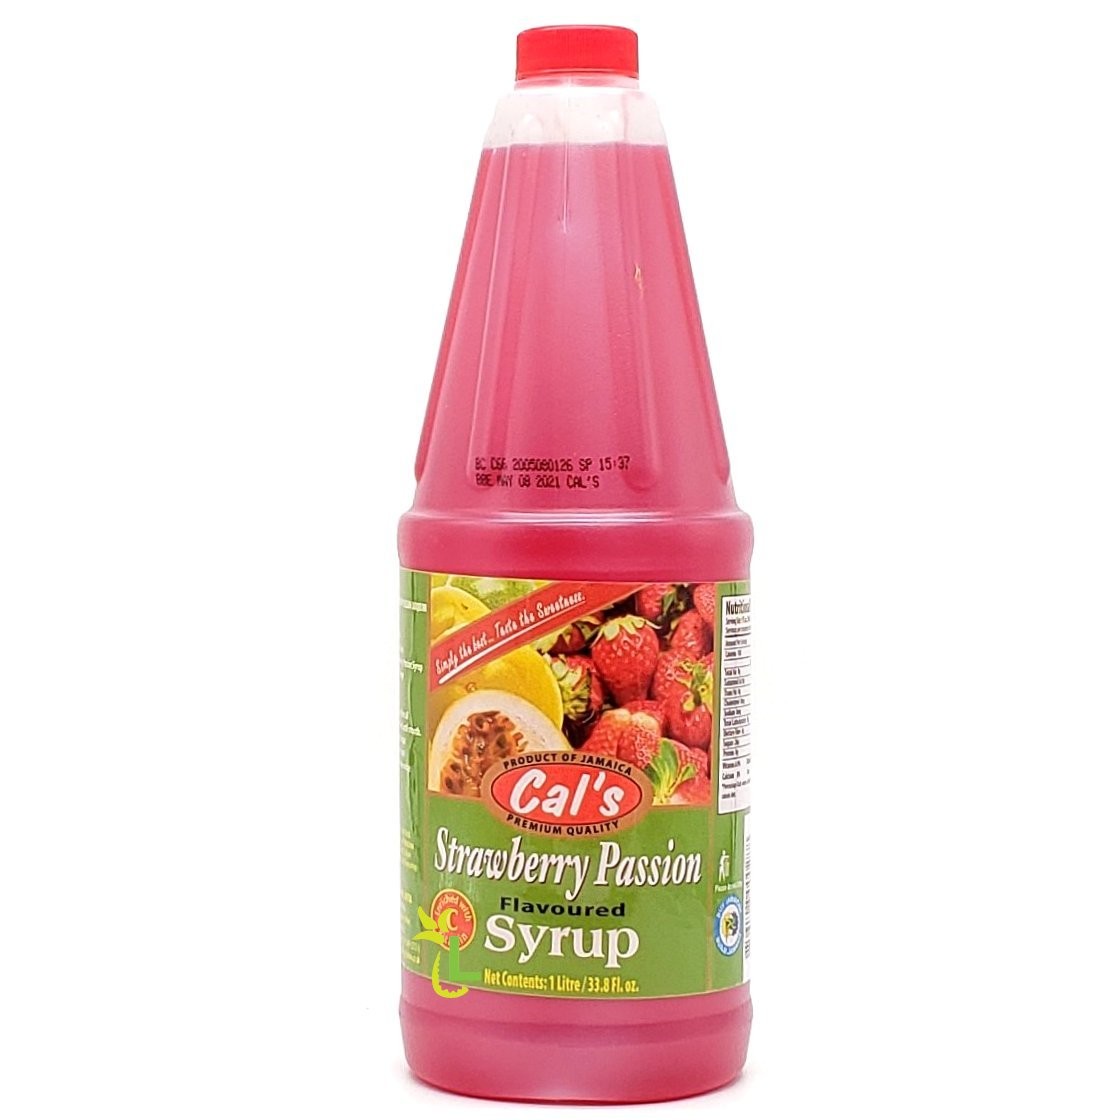 CALS SYRUP STRAWBERRY PASSION 1L